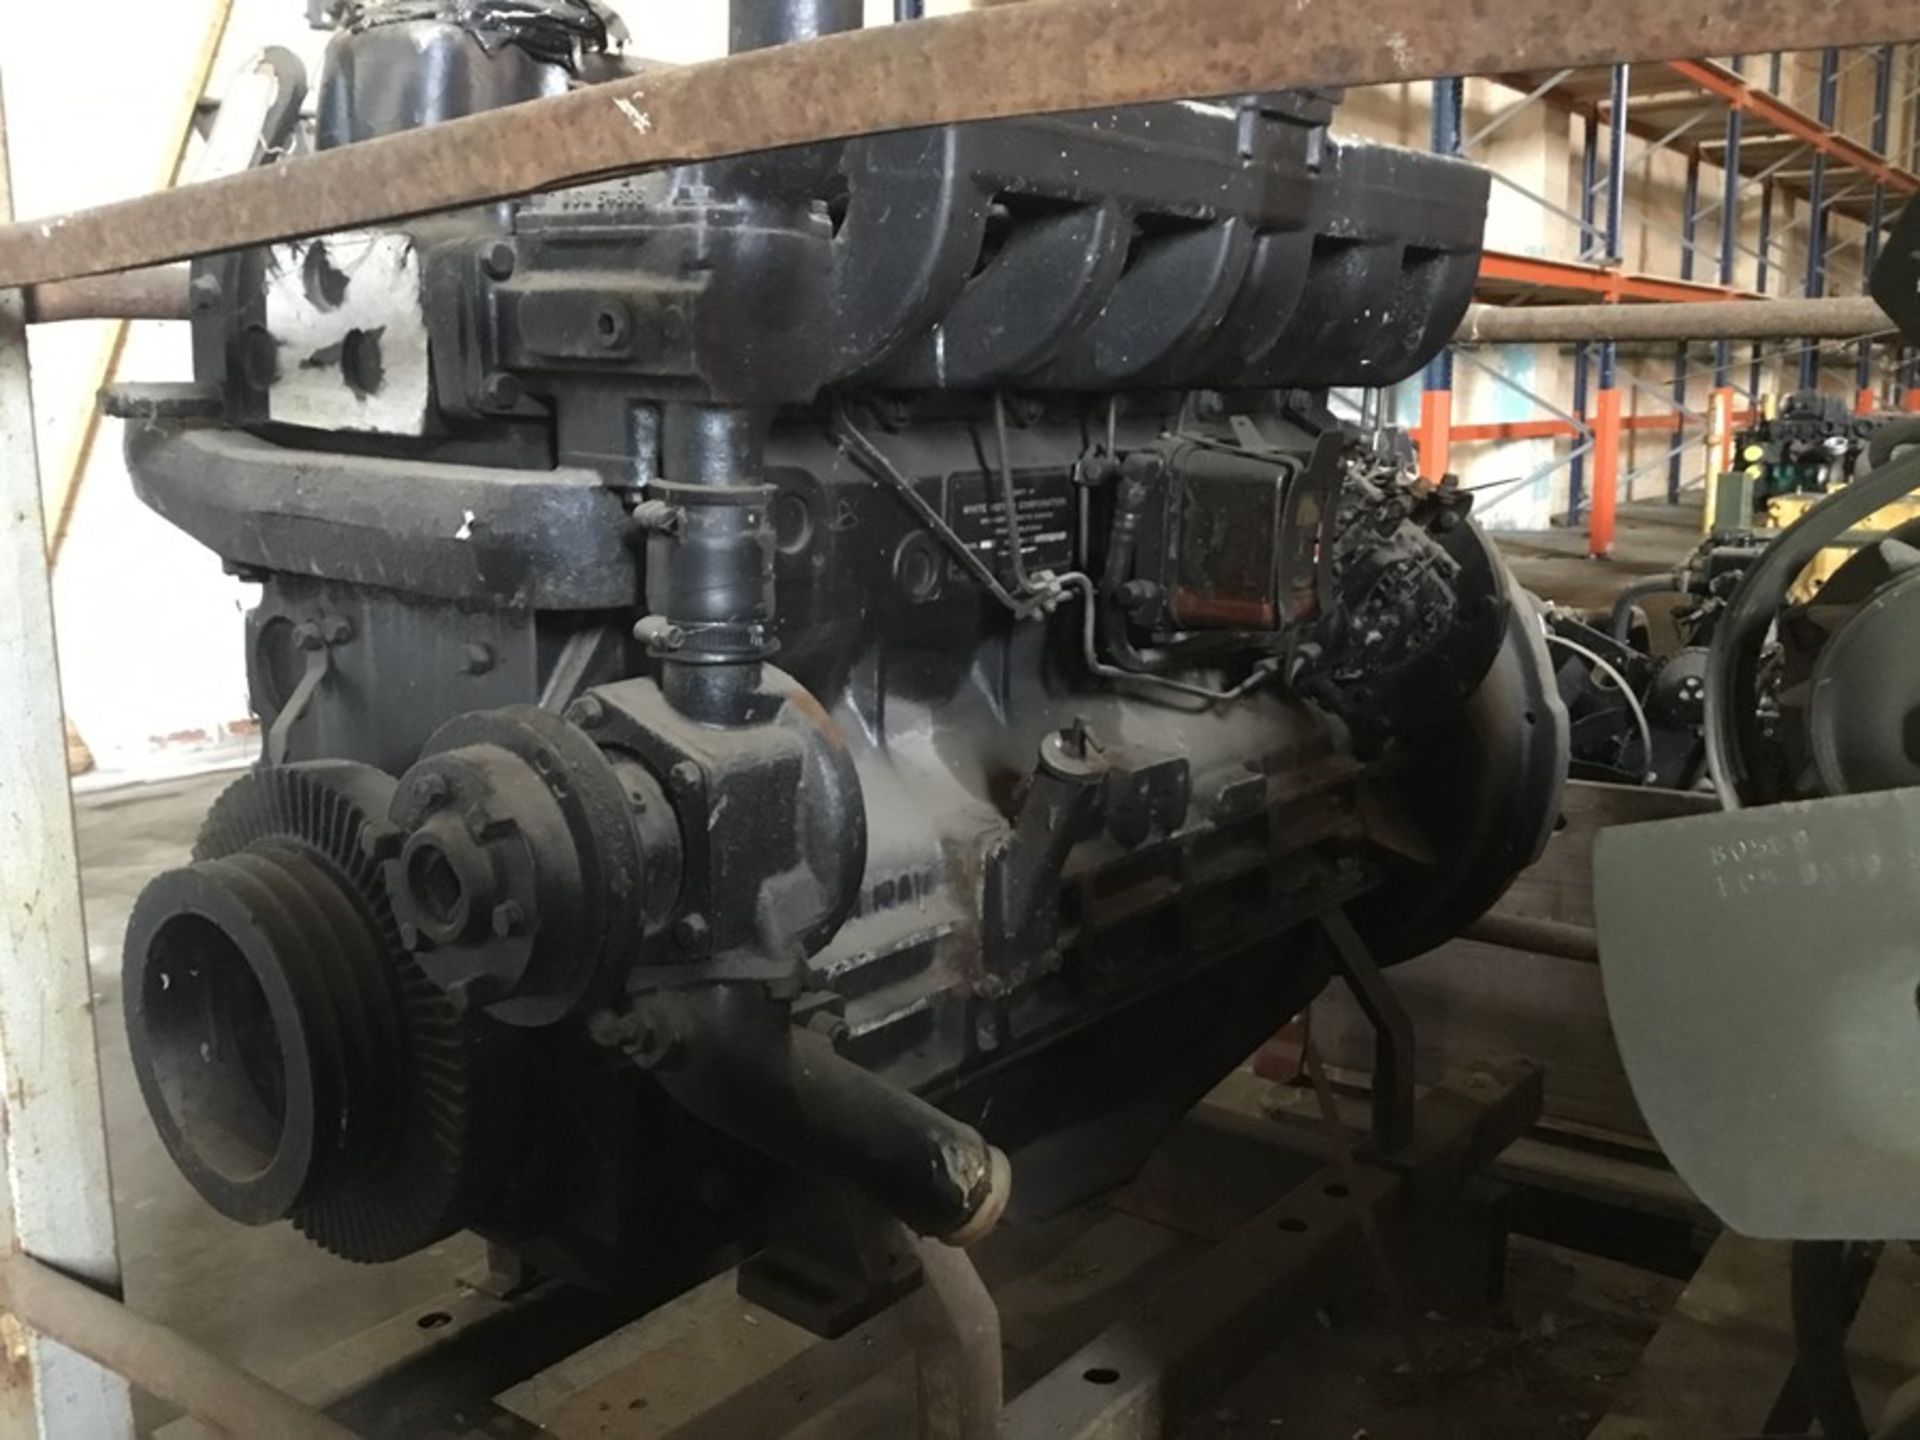 Diesel engine: Whites Motor company D4300 6cyl Non turbo Serial 4300-01